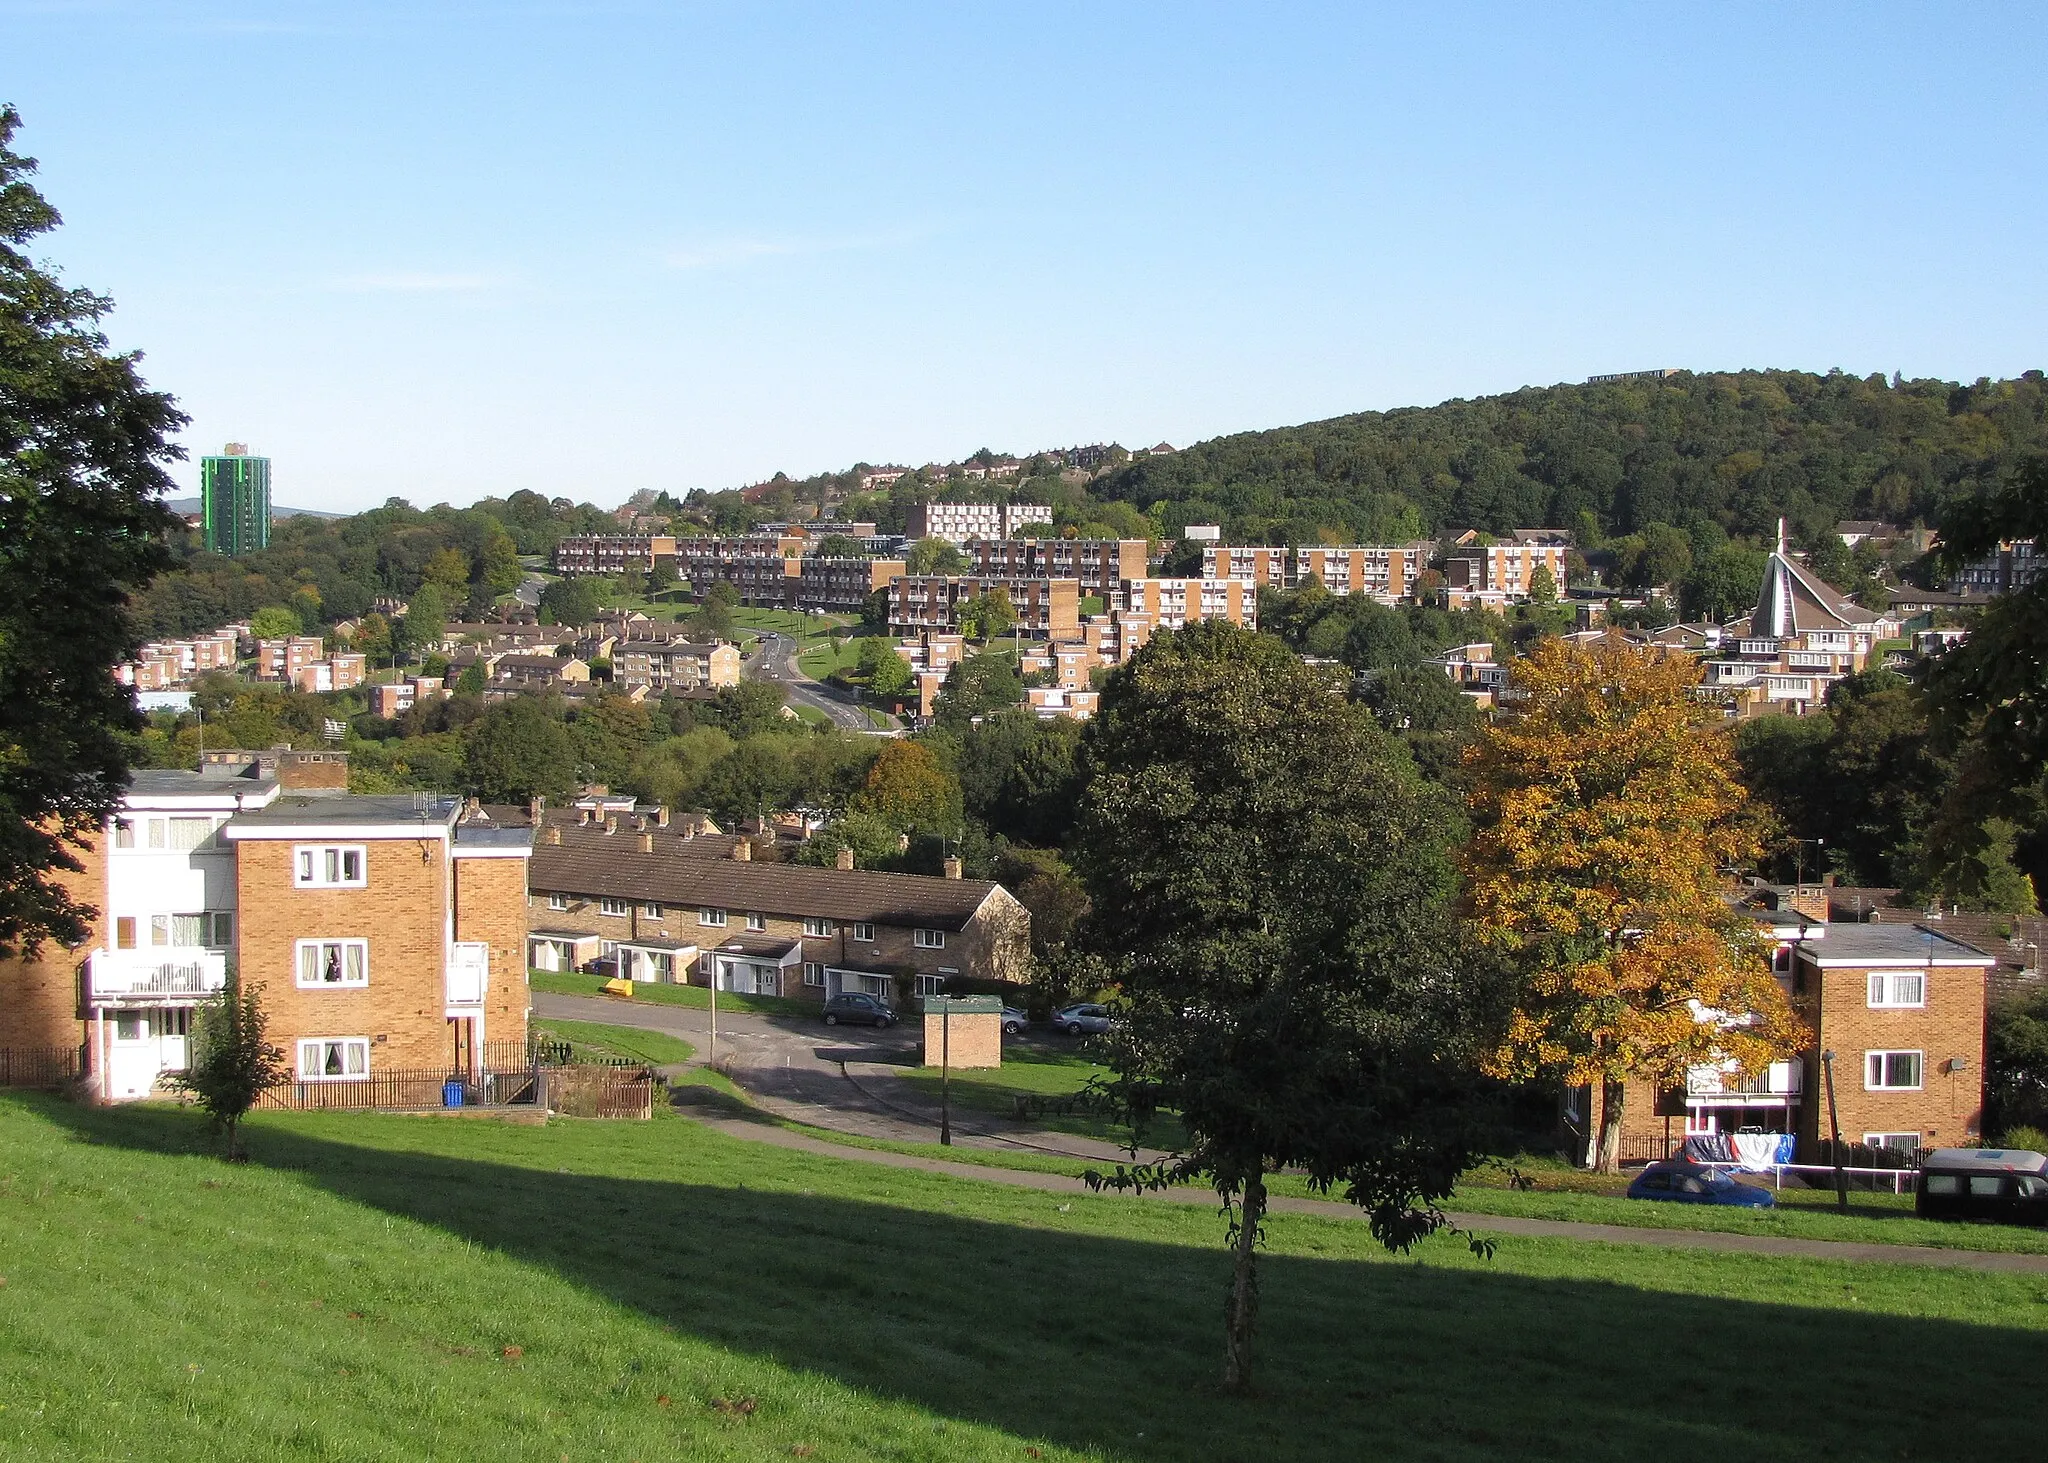 Photo showing: A view of the Gleadless Valley housing estate in Sheffield, England. Looking north from Overend Rd / Blackstock Rd.